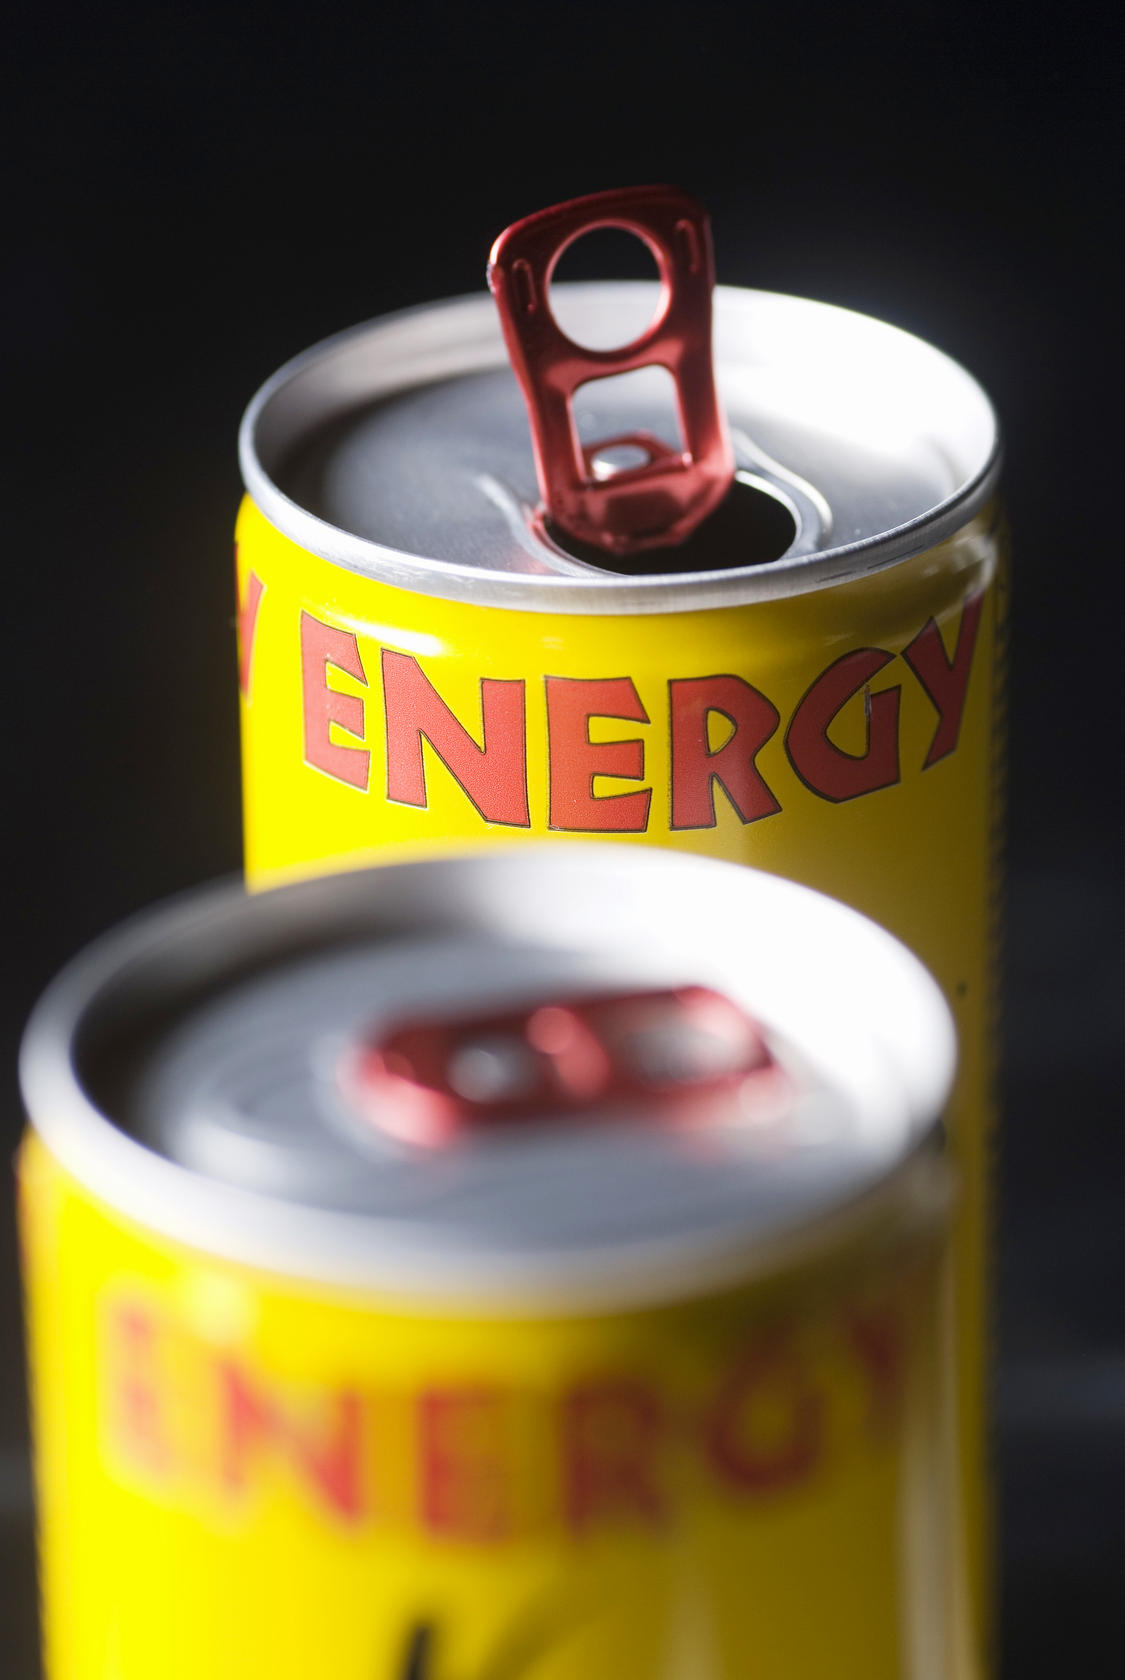 Students  who drank beverages high in sugar and caffeine were 66 per cent likelier to have symptoms of hyperactivity and inattention. Photo: Ryman/photocuisine/Corbis